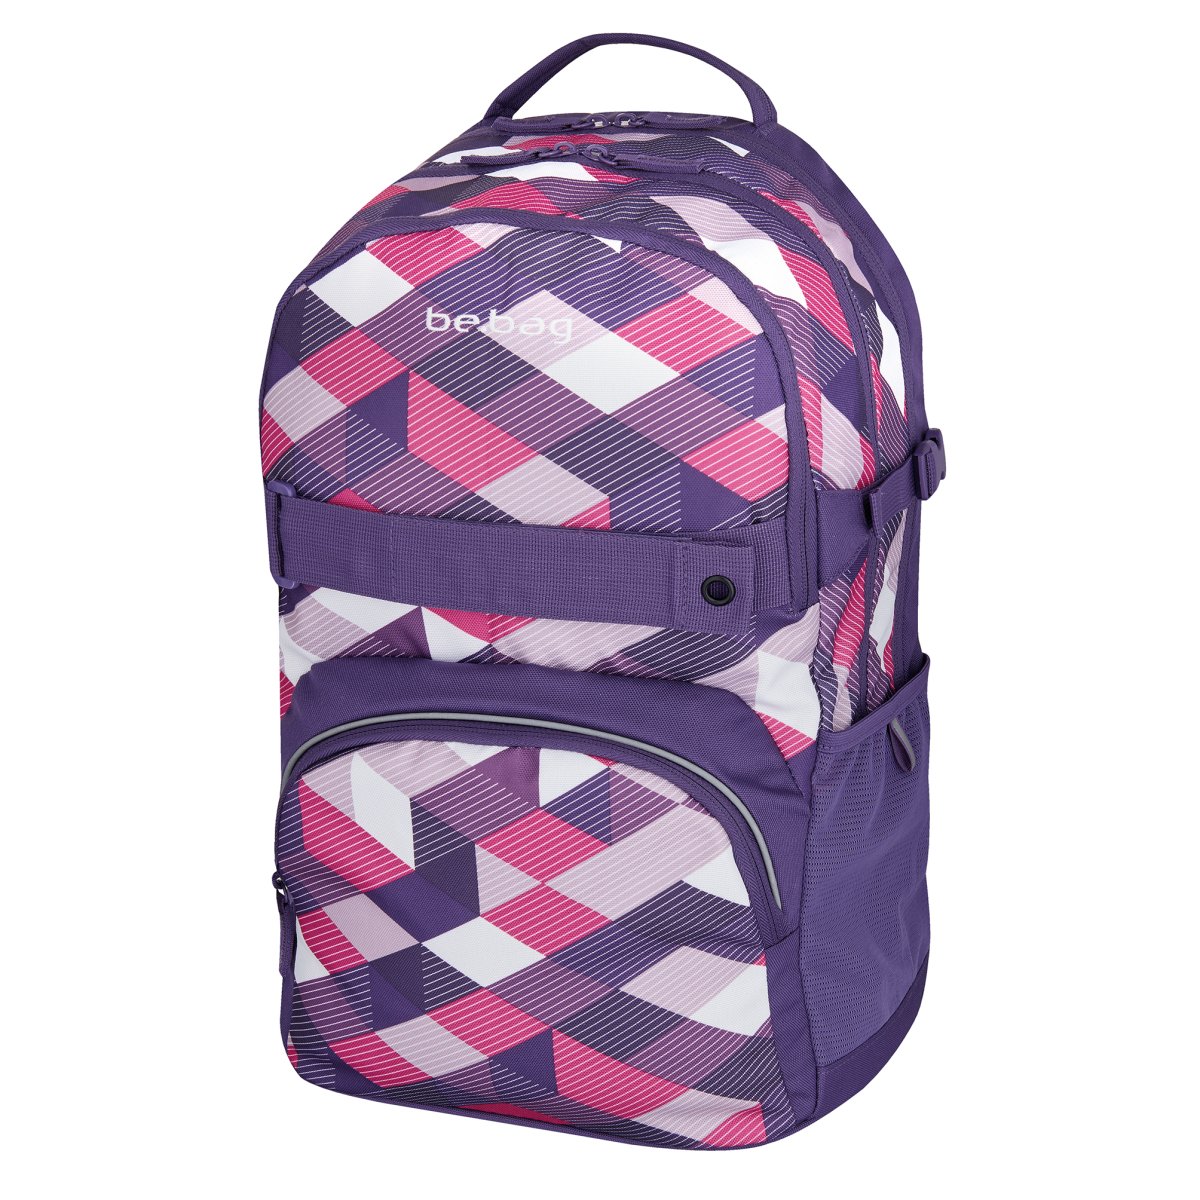 mint Executable Conclusion school backpack be.bag cube Purple Checked - Herlitz